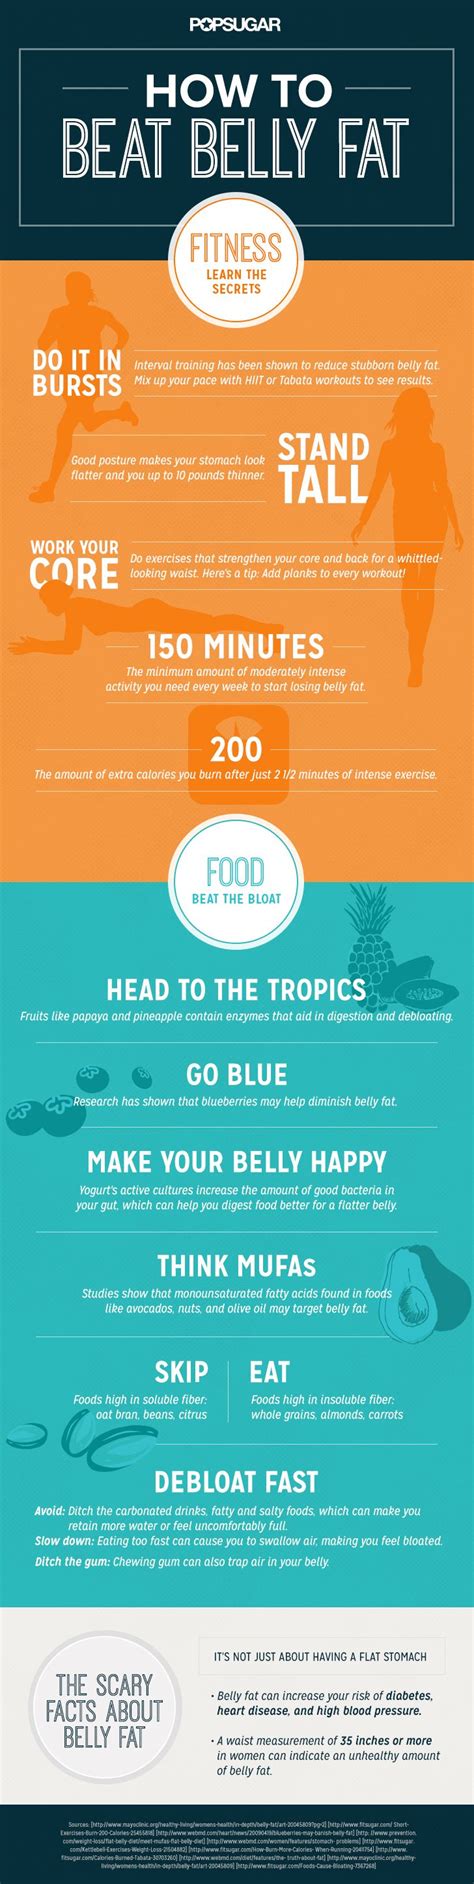 Your Resource For the Best Flat-Belly Tips Healthy Tips, Healthy Body, How To Stay Healthy ...